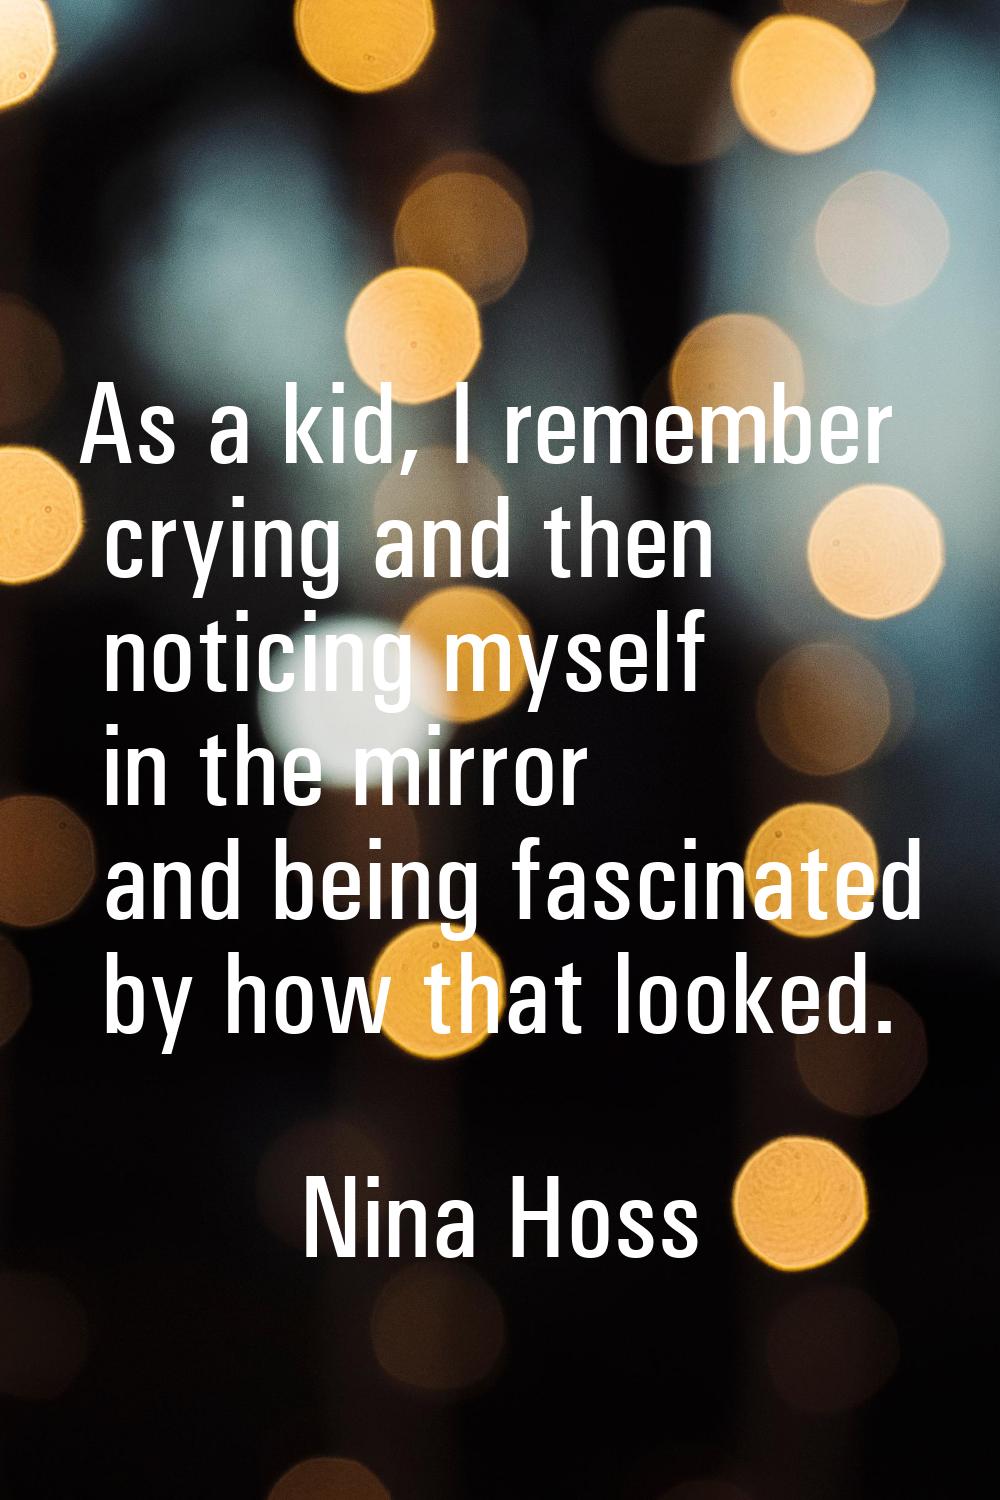 As a kid, I remember crying and then noticing myself in the mirror and being fascinated by how that